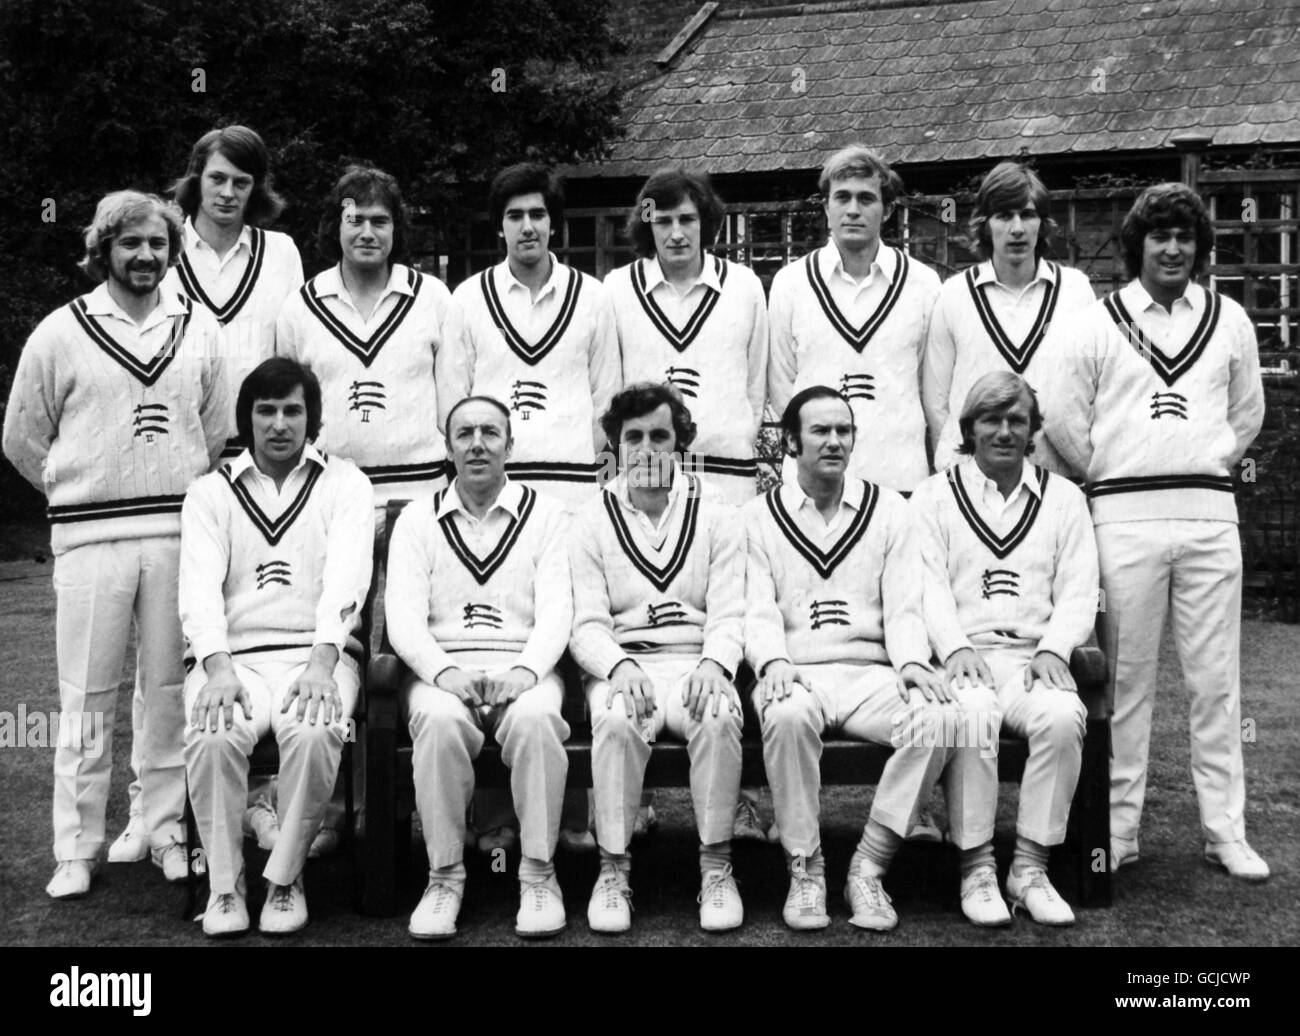 Cricket - Cricket - Middlesex County Cricket Club - 1975 - Team Group Stock Photo